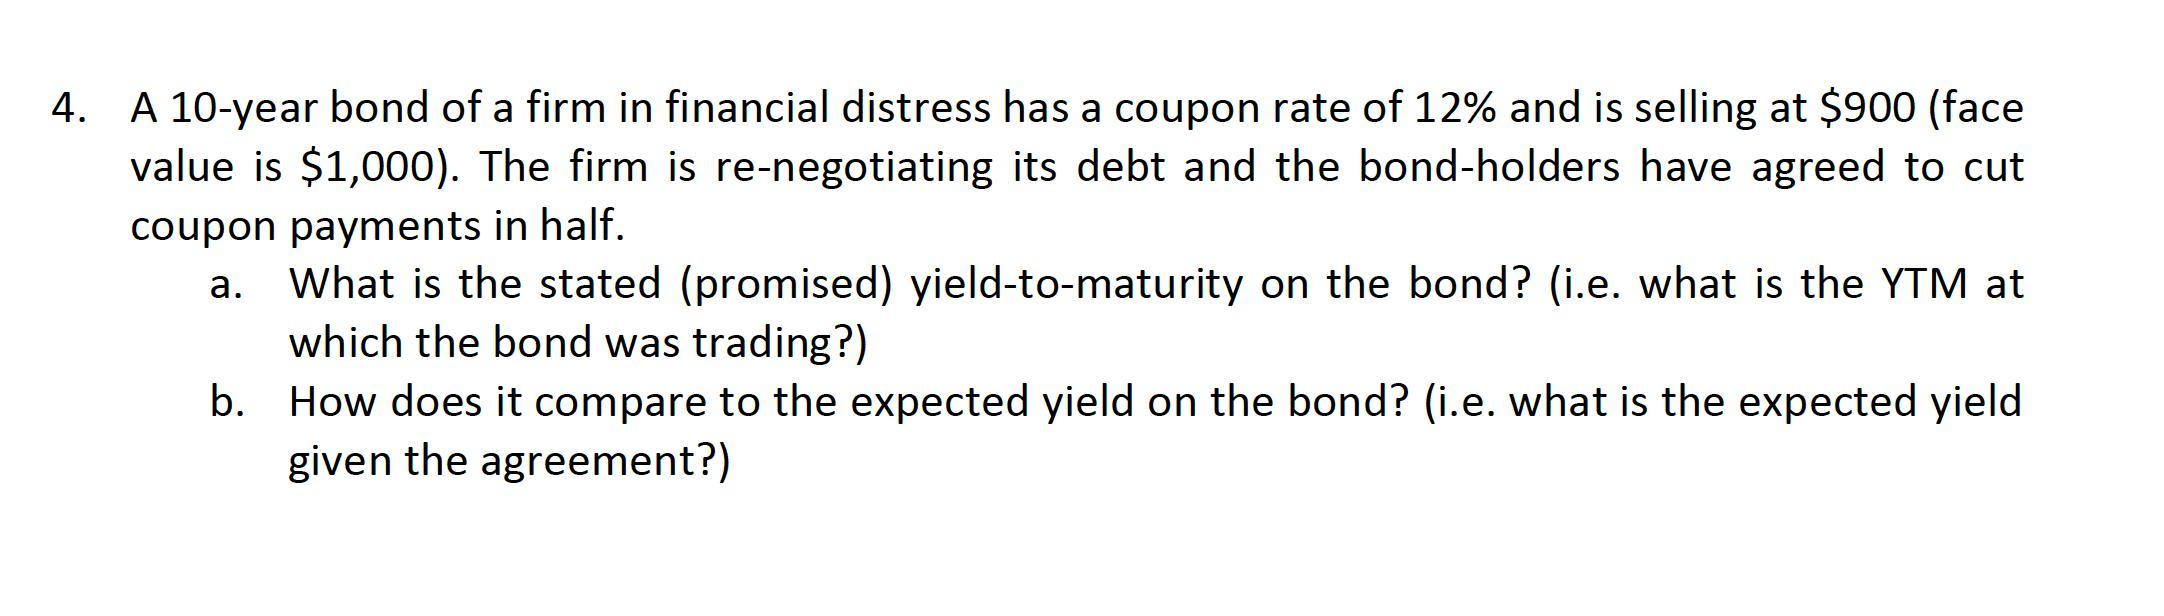 4. A 10-year bond of a firm in financial distress has a coupon rate of 12% and is selling at $900 (face value is $1,000). The